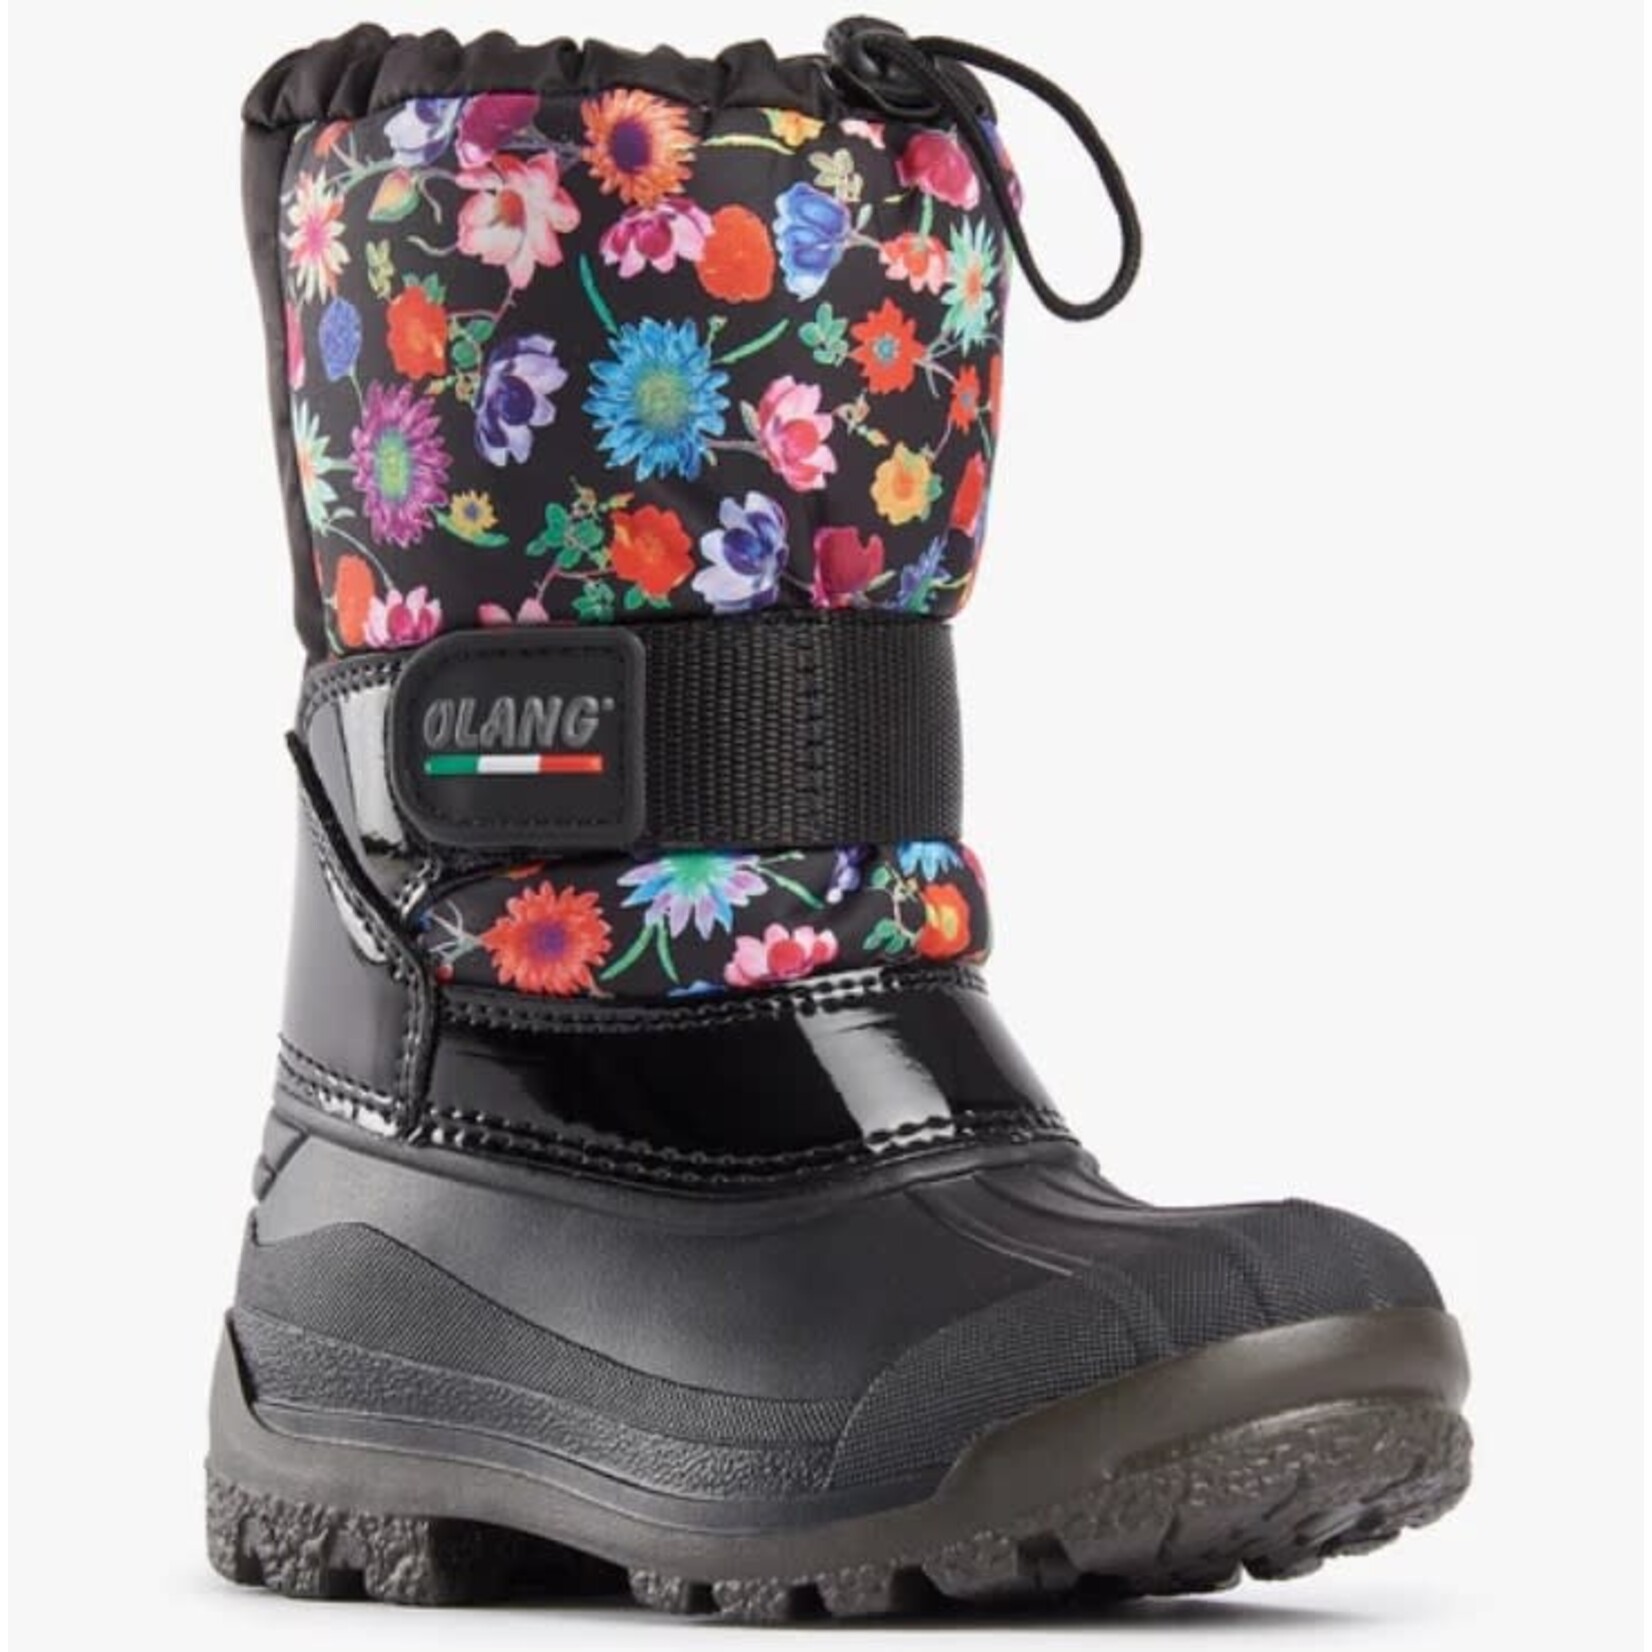 Olang OLANG - Winter boots  with removable liner - Fiori Multi